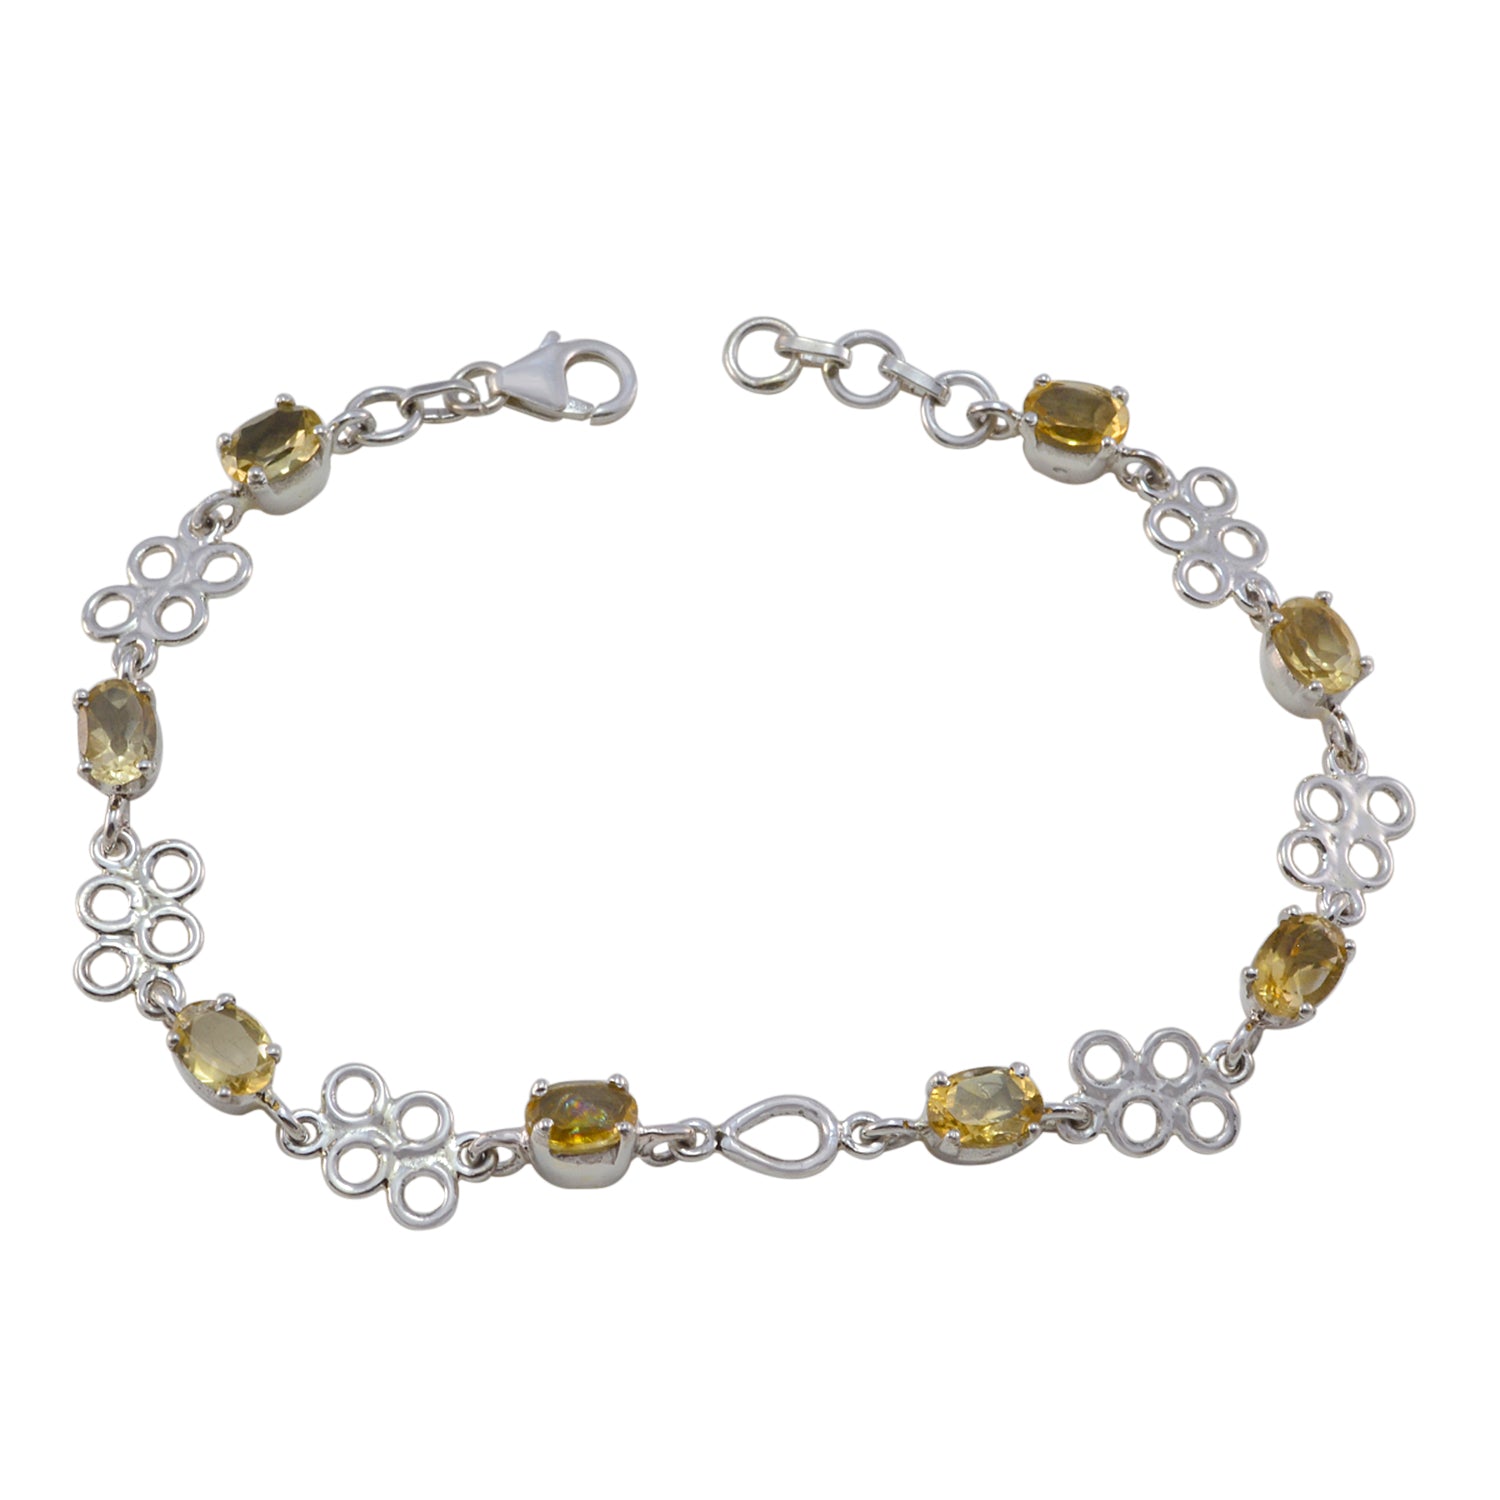 Riyo Nice Gemstone Oval Faceted Yellow Citrine Silver Bracelets gift for b' day